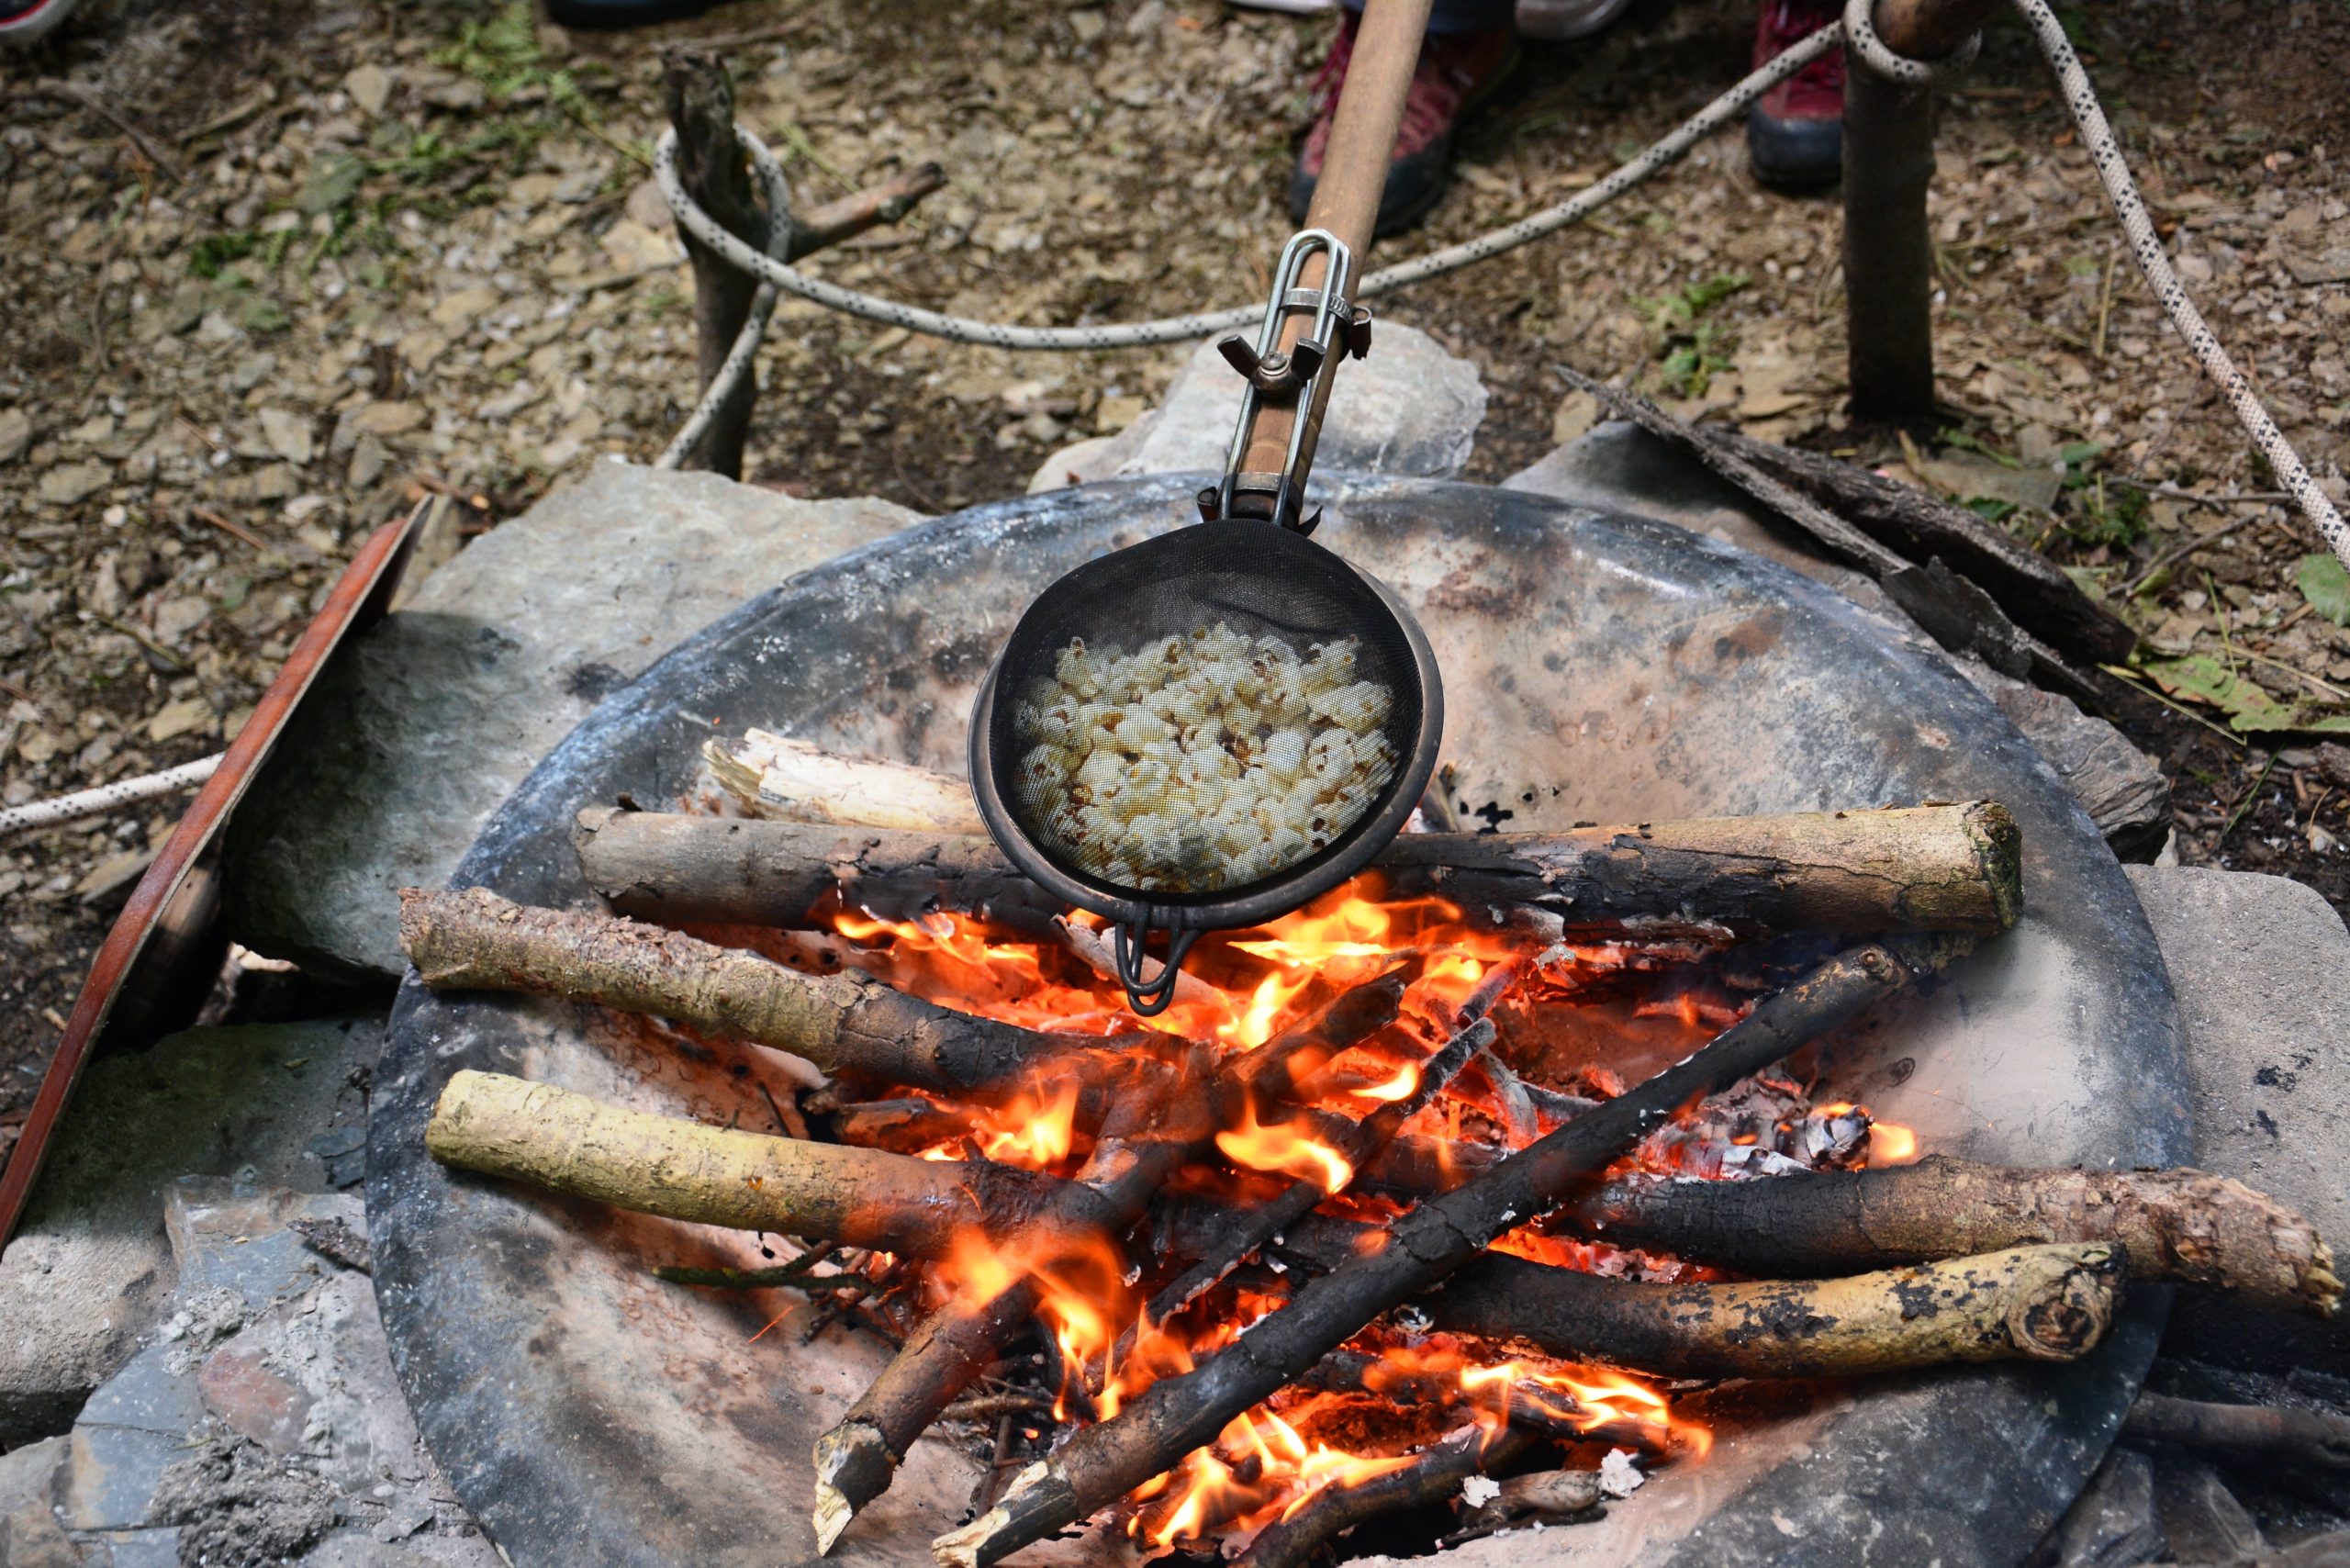 A contraption that consists of two sieves on top of each other (to create a bubble shape) is over a fire with popcorn inside it. There is wood in the firebowl, ropes in the background and dead leaves and twigs all over the floor.